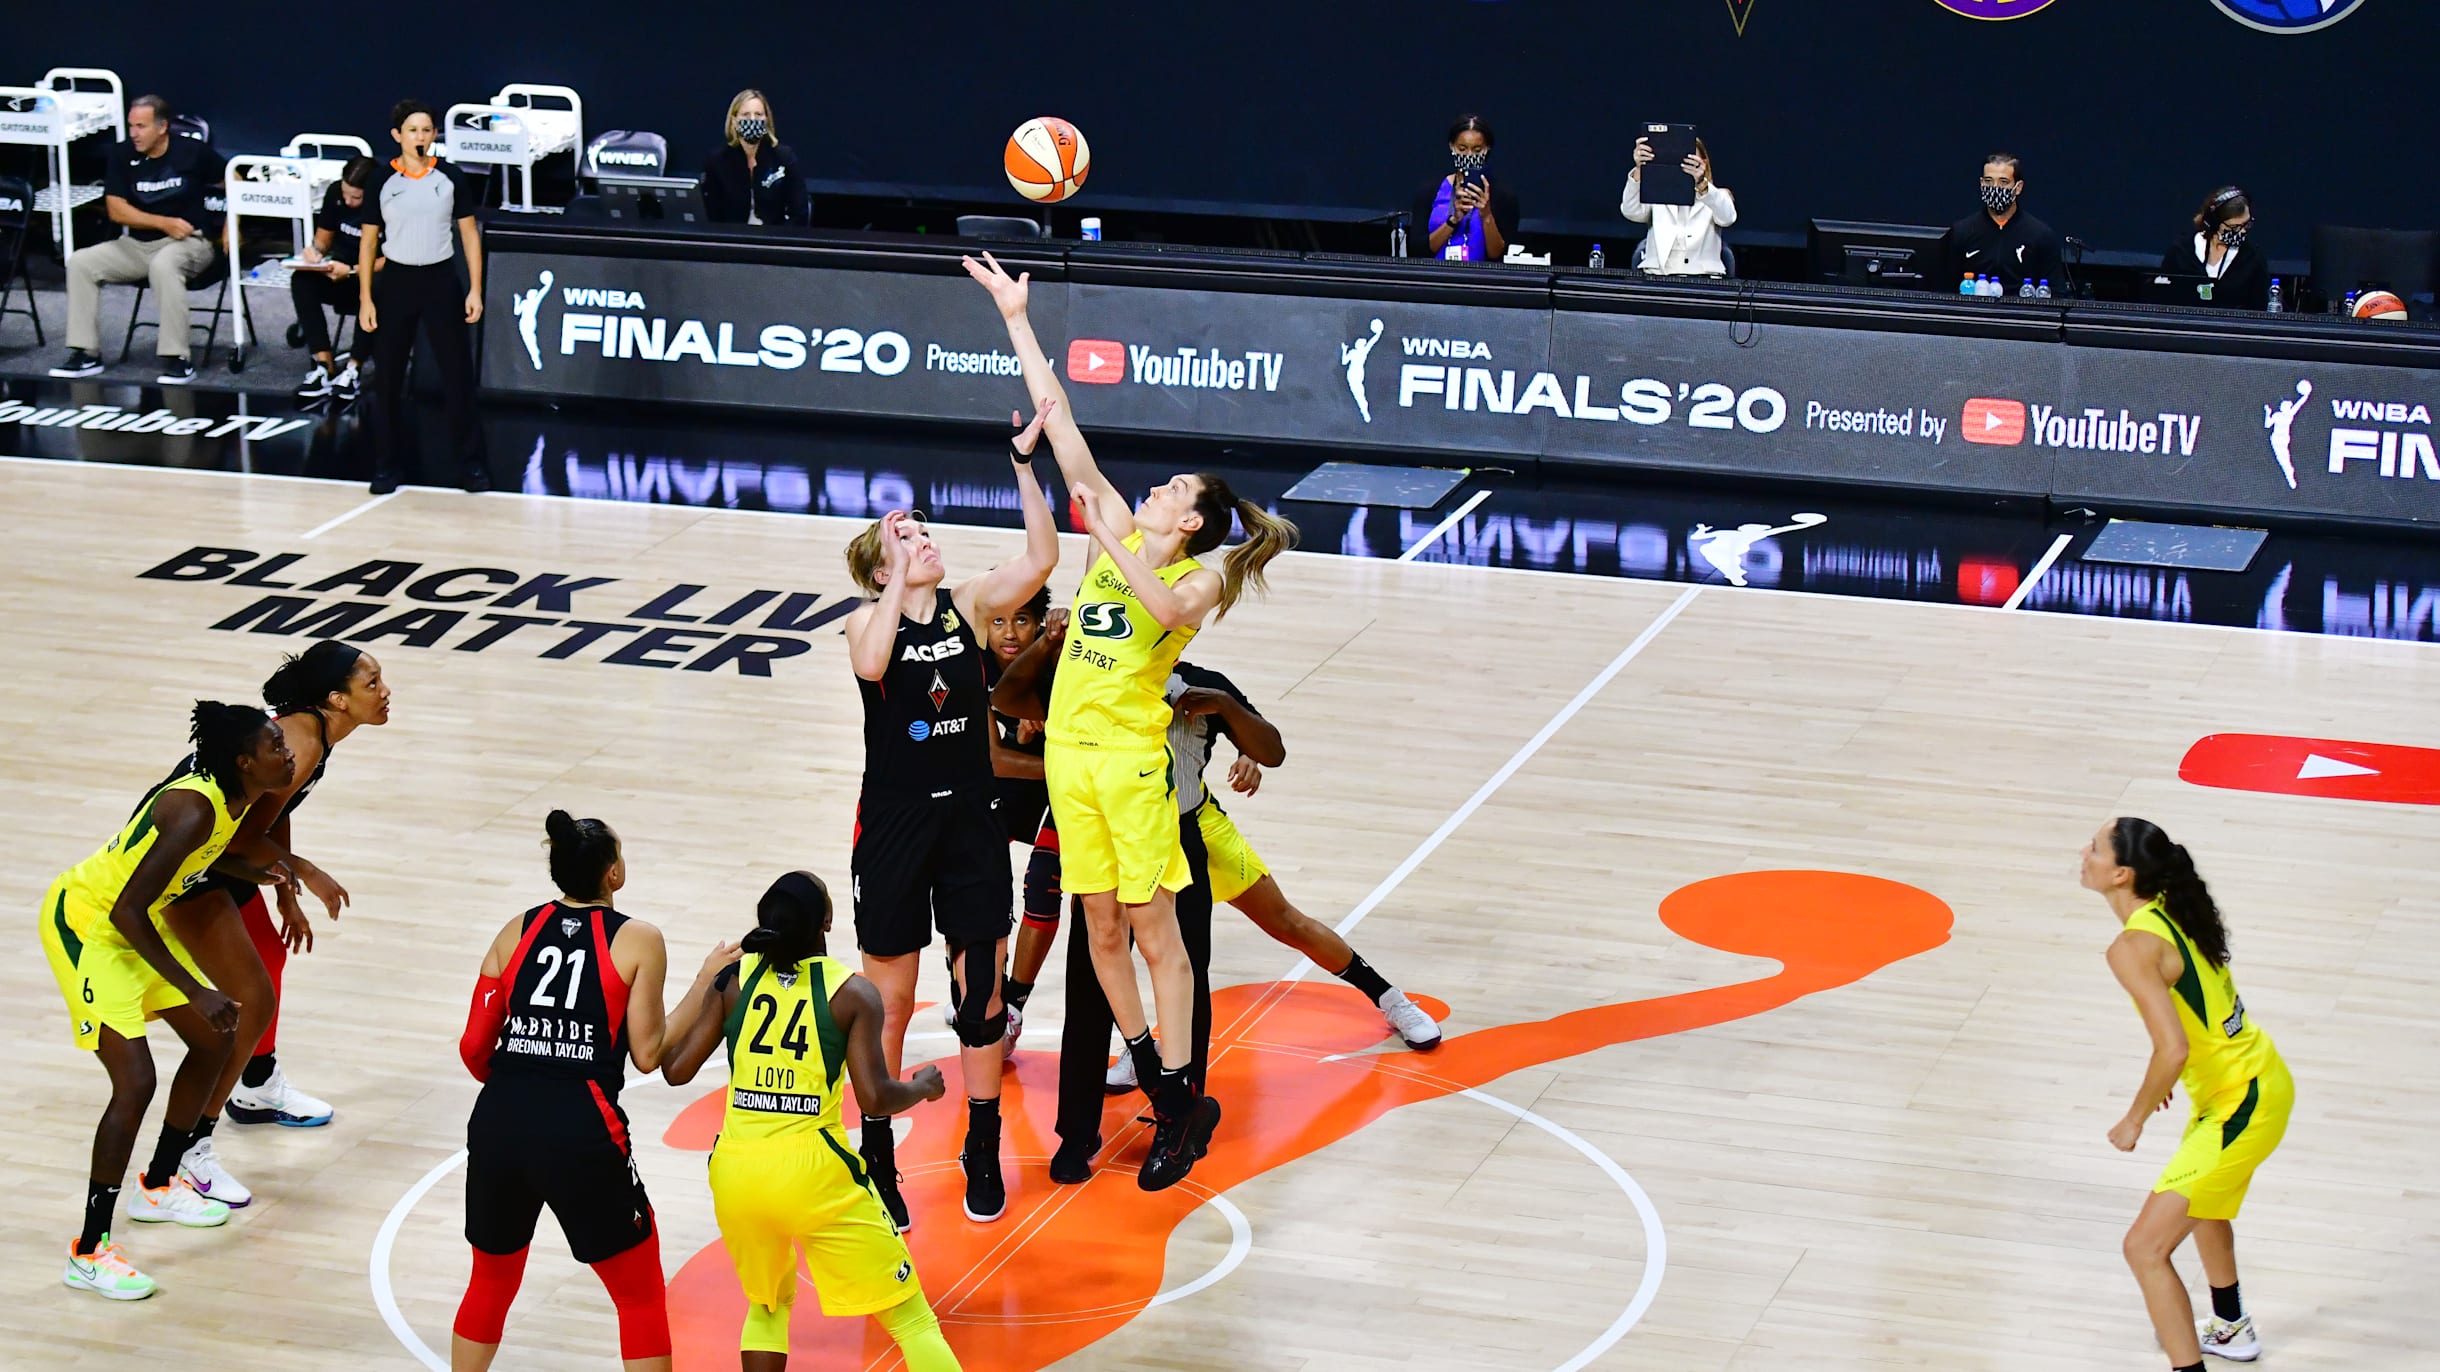 The @lvaces have won their second straight WNBA Championship